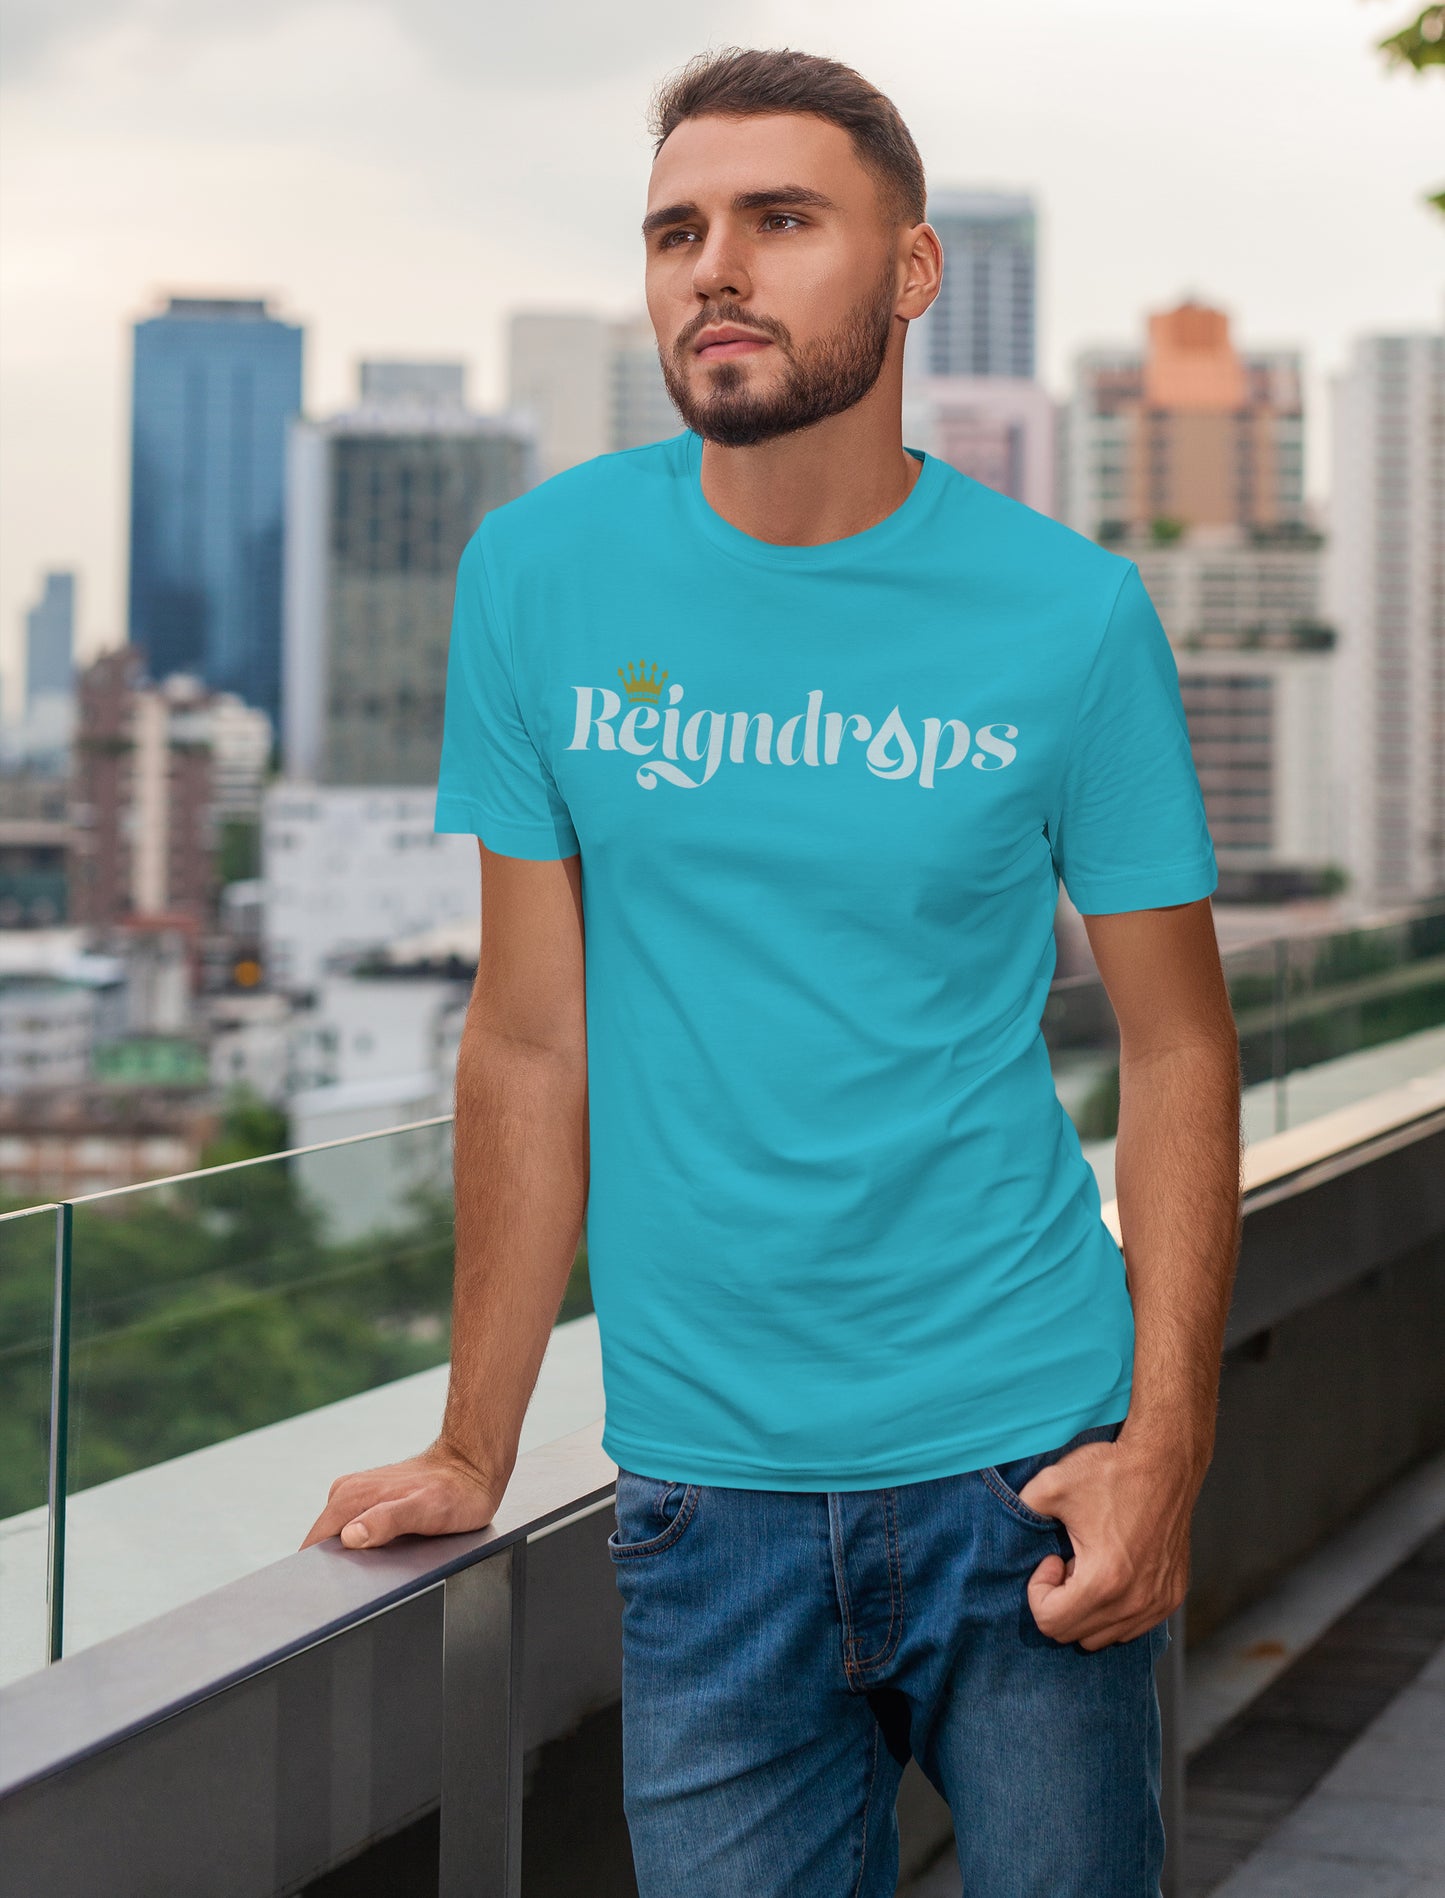 Reigndrops Tee for Men